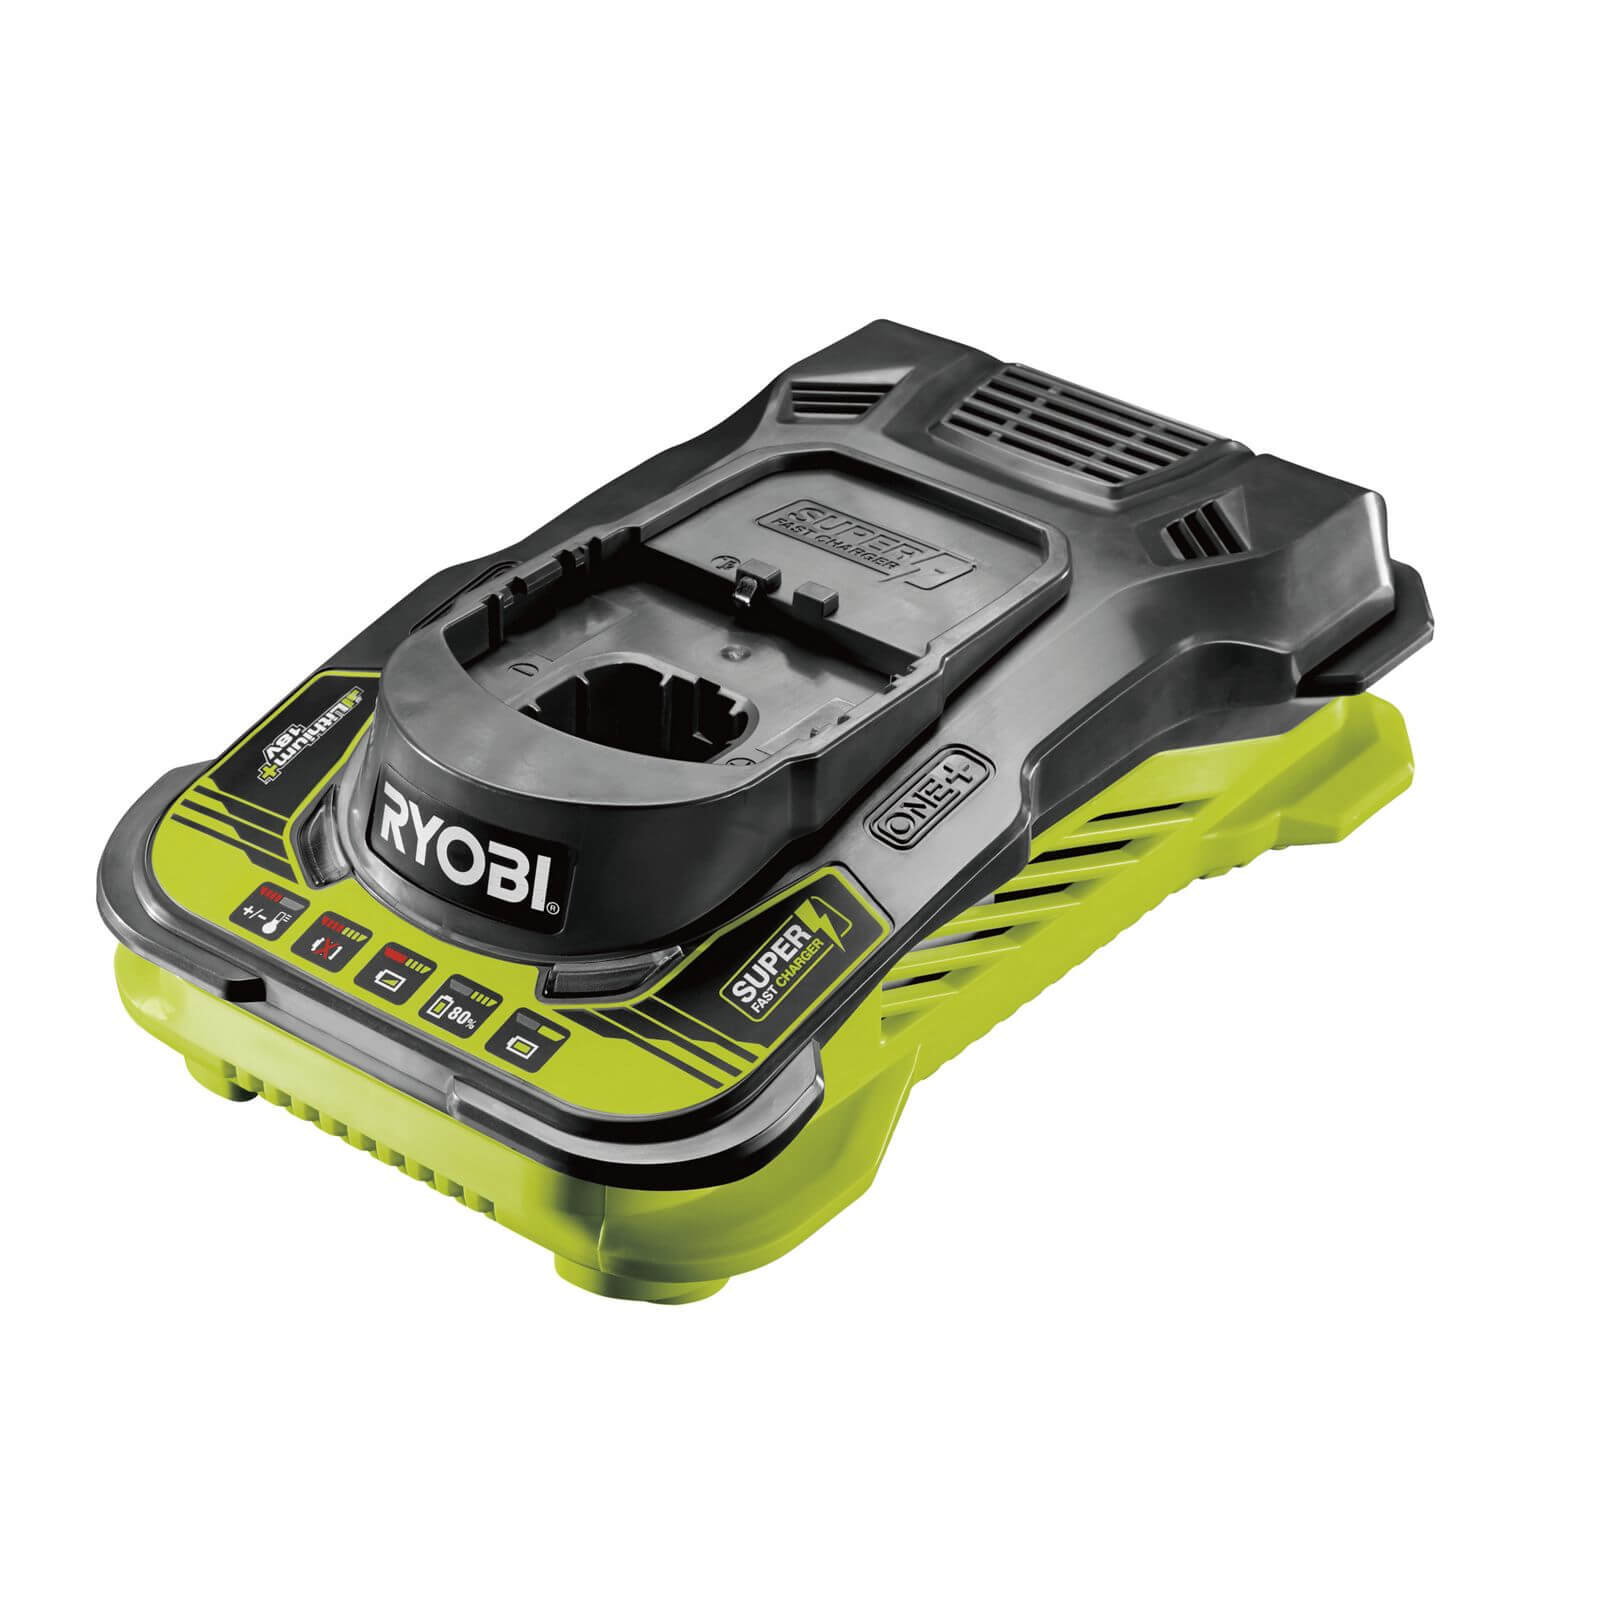 Ryobi ONE+ 18V Fast Charger RC18150